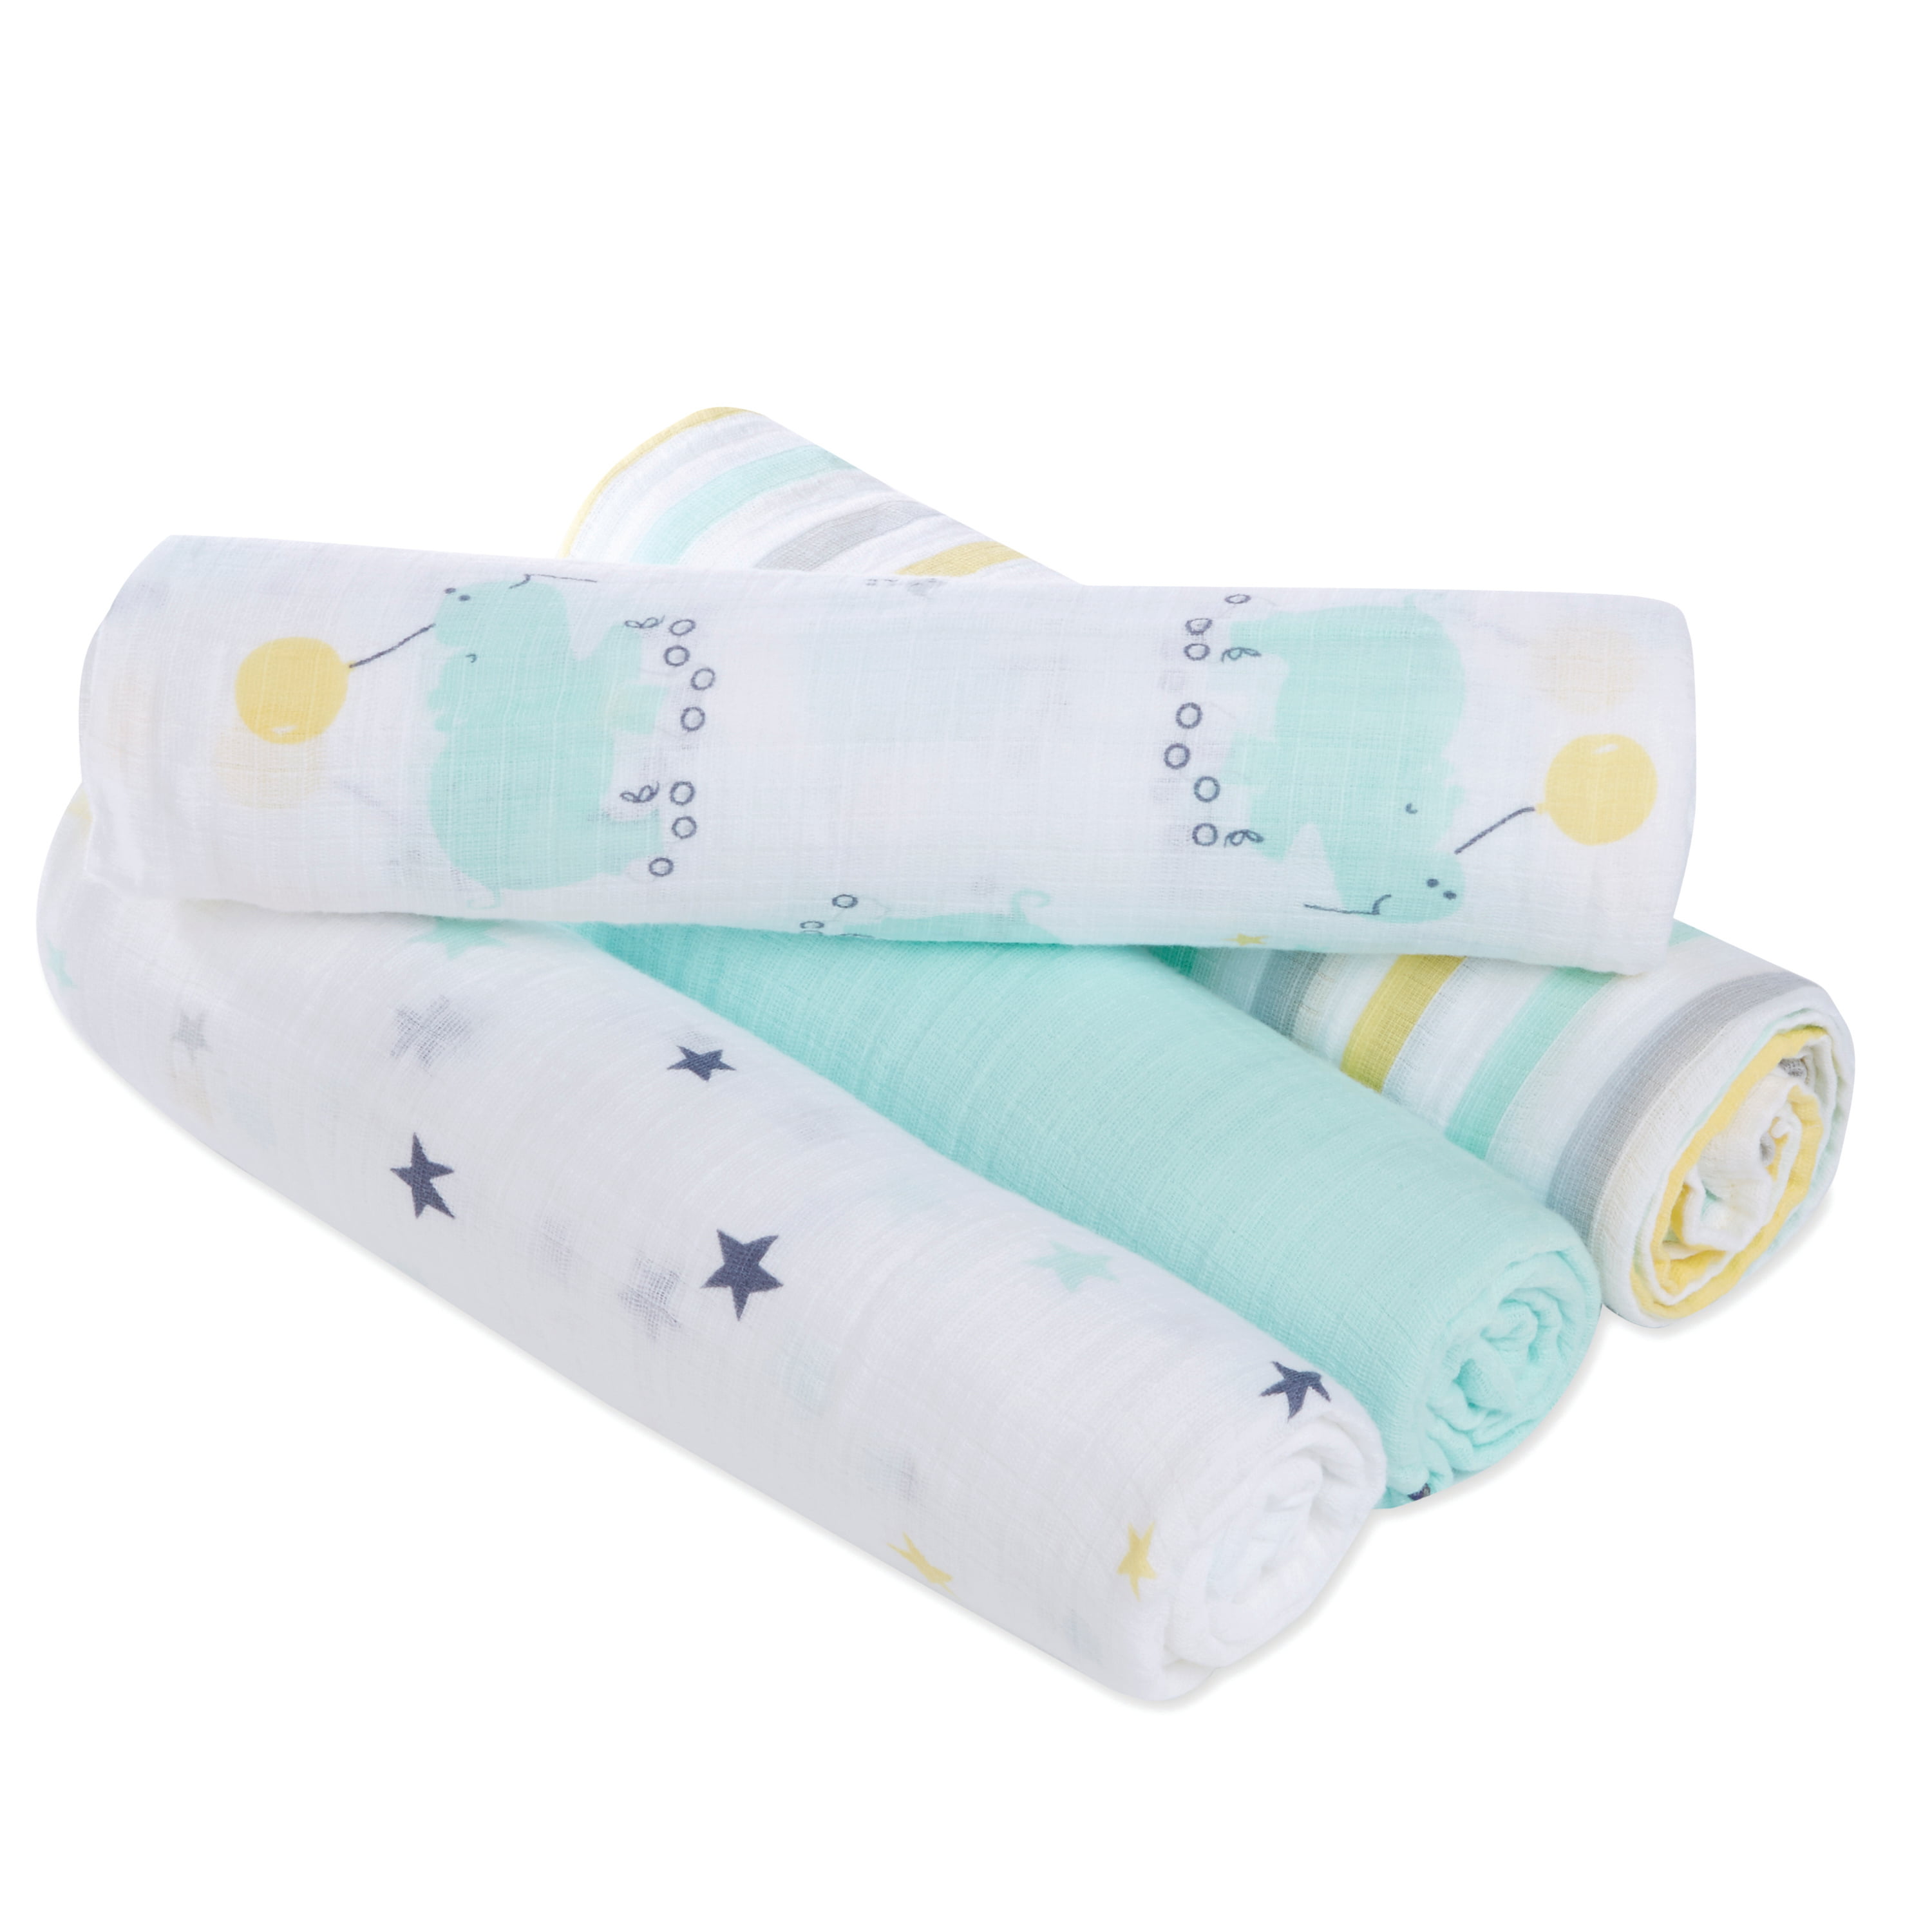 Aden by aden Retro Large 44 X 44 inch 4 Pack anais Classic Swaddle Baby Blanket 100% Cotton Muslin